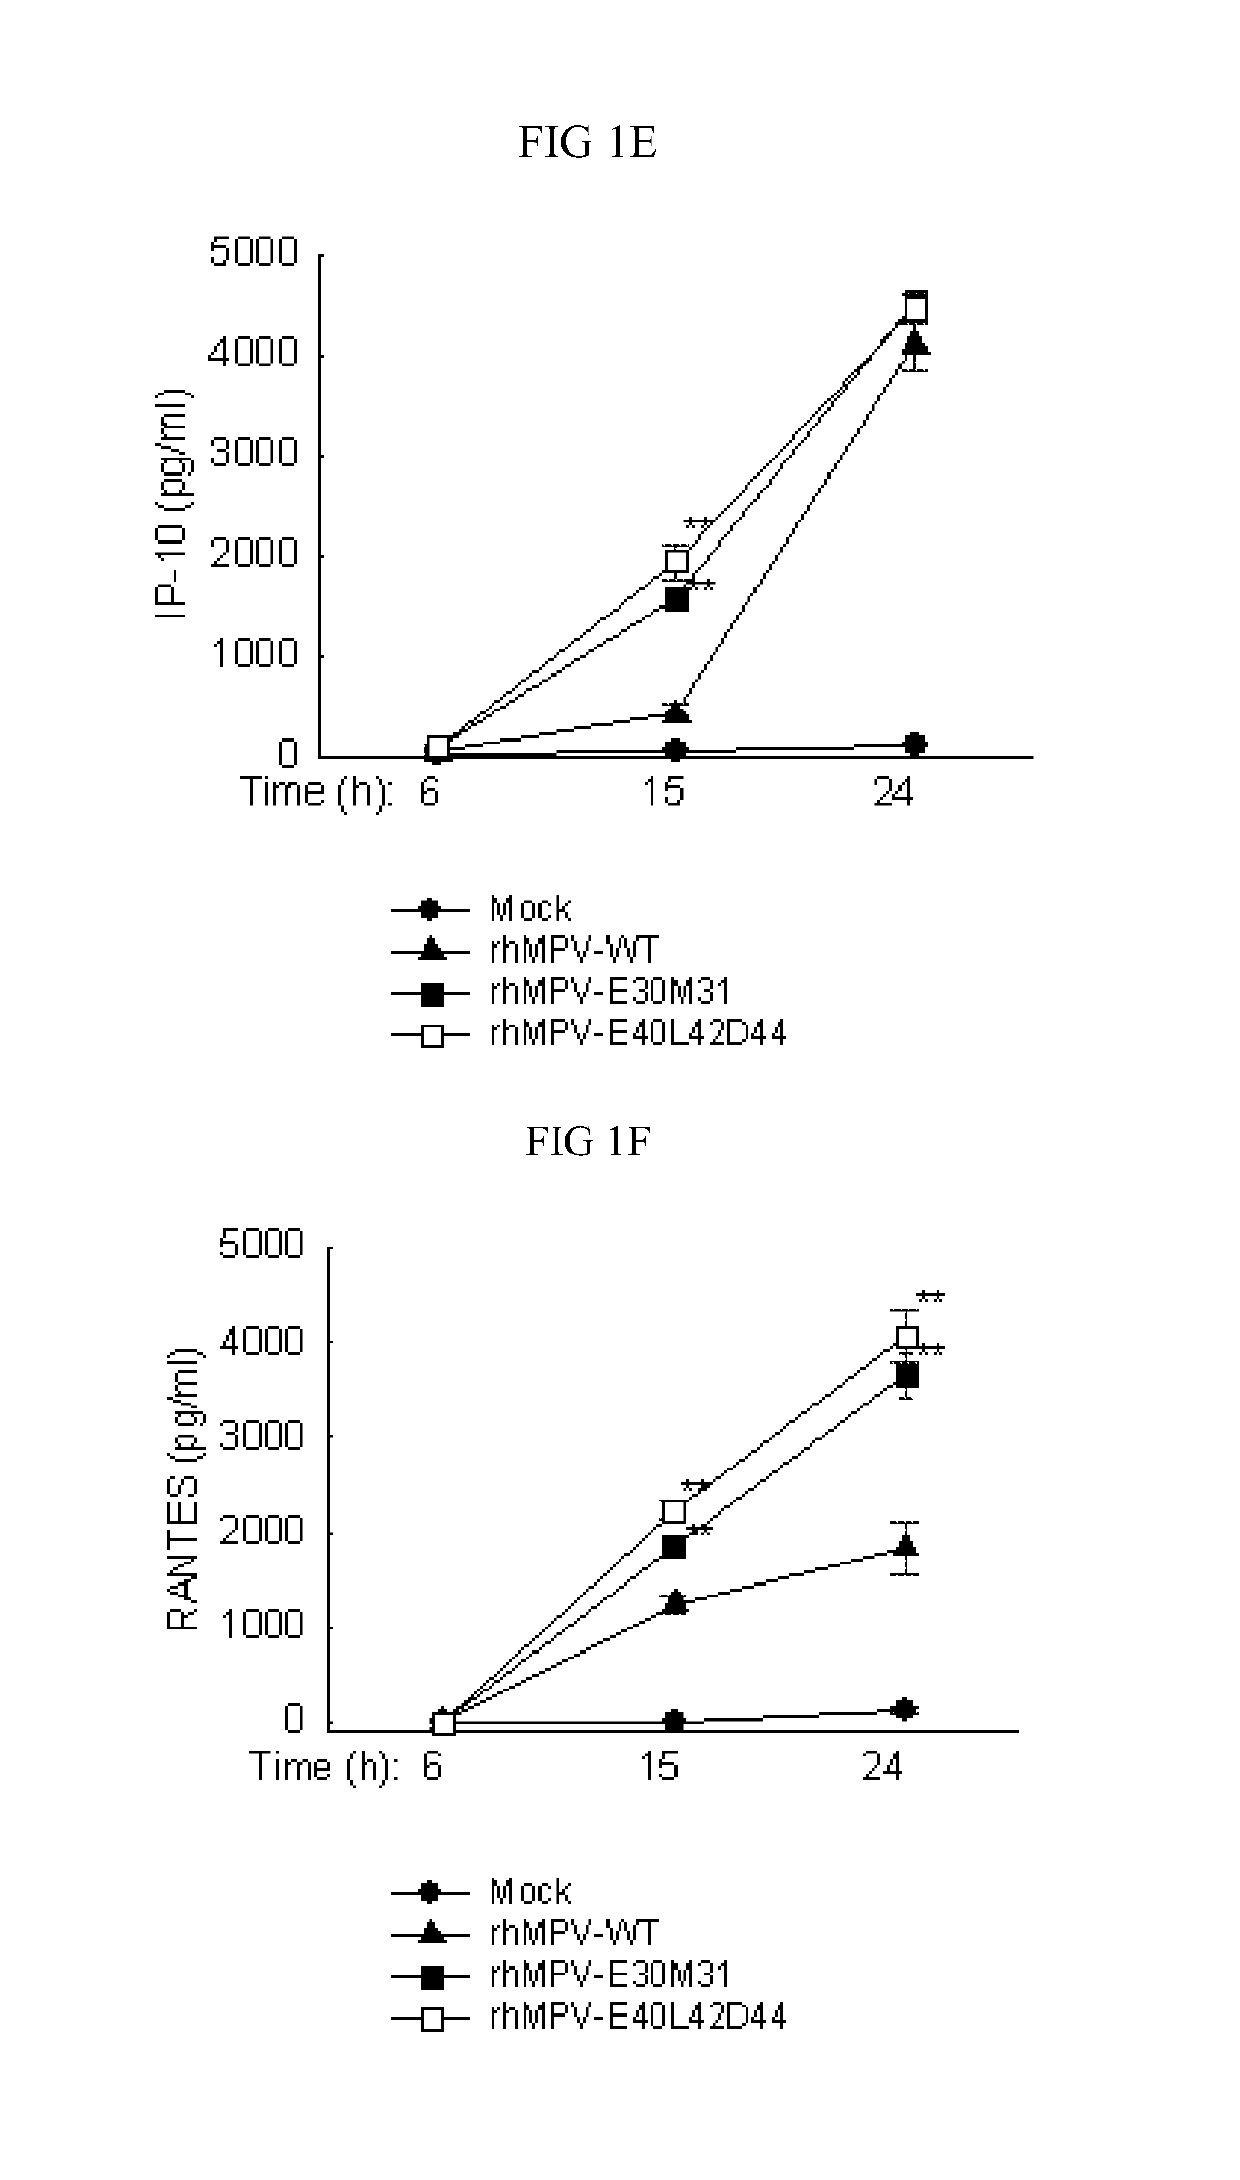 Live attenuated recombinant hmpv with mutations in pdz motifs of m2-2 protein, vaccine containing and use thereof